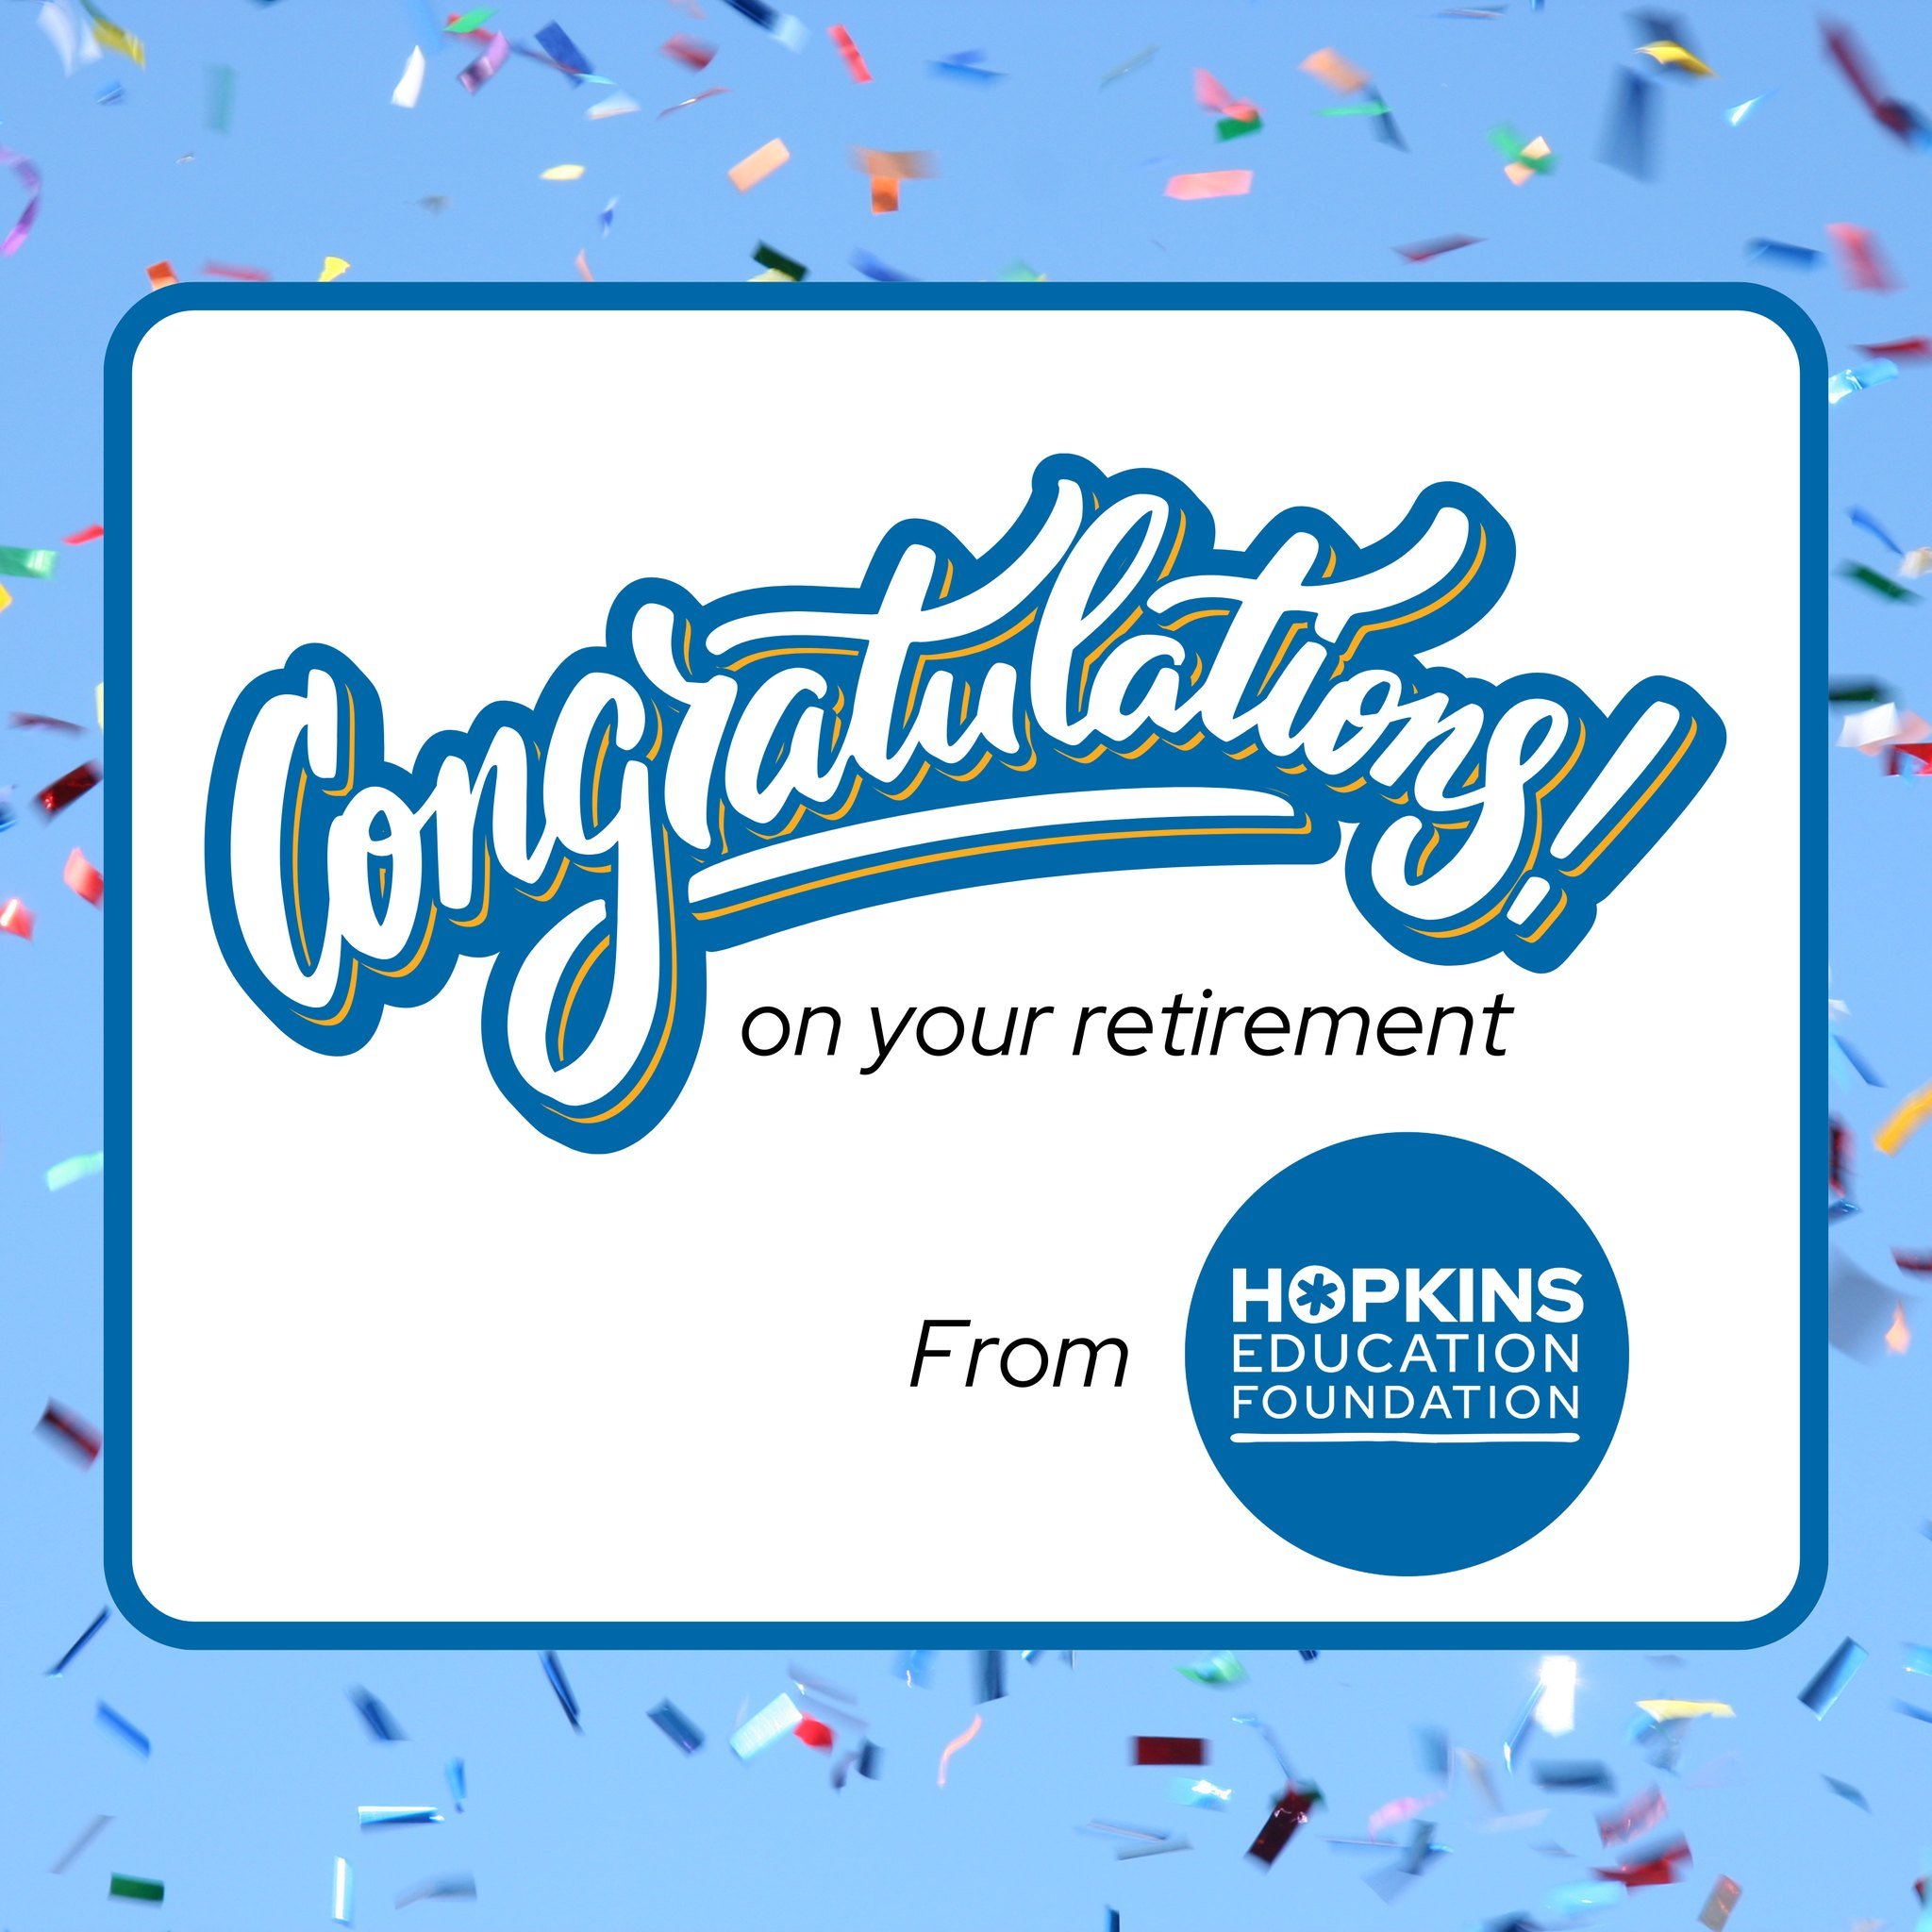 Congratulations to all the @hopkinsschools teachers and staff retiring this year! We are so grateful for your years of service and dedication to our Hopkins students. We wish you all the best on your next adventures. Please stay in touch by subscribi